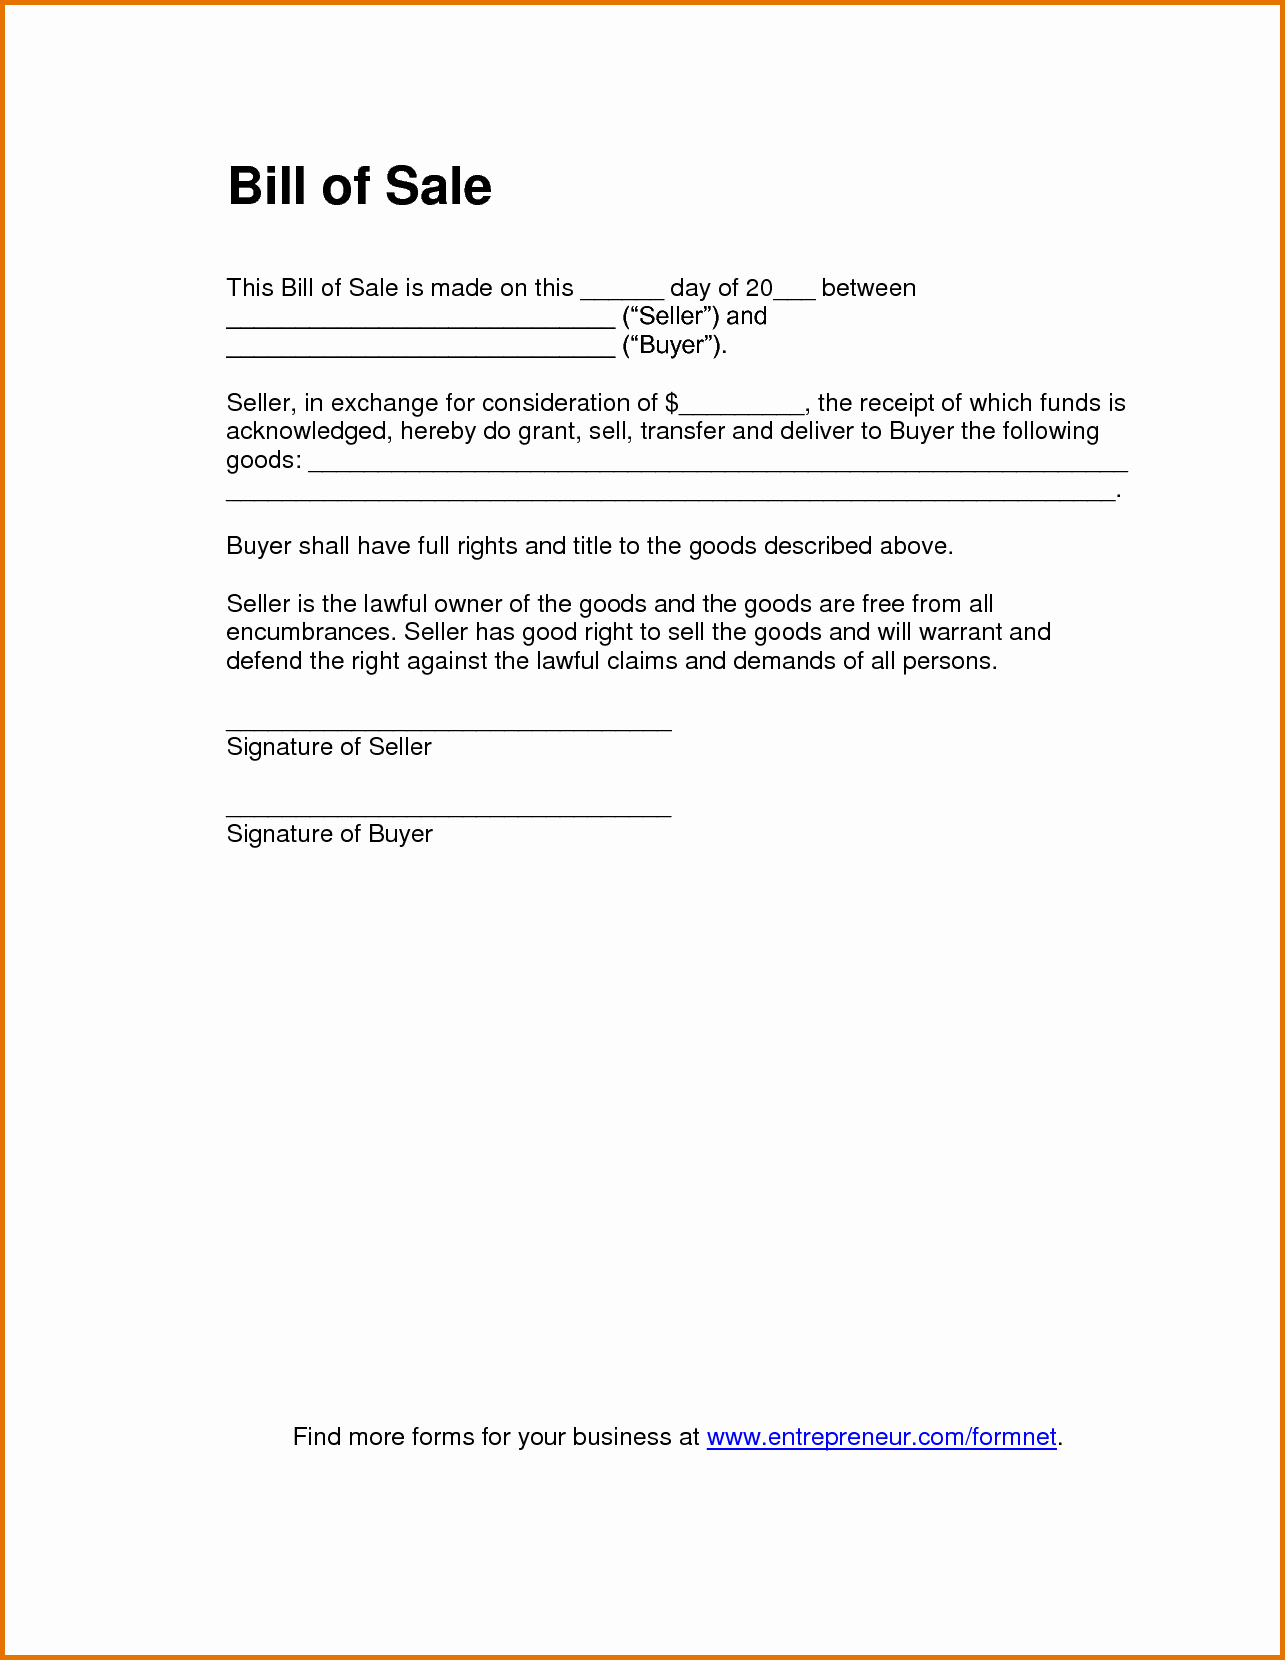 Bill Of Sale Sample Document Fresh 8 Bill Of Sale Template Pdfreference Letters Words